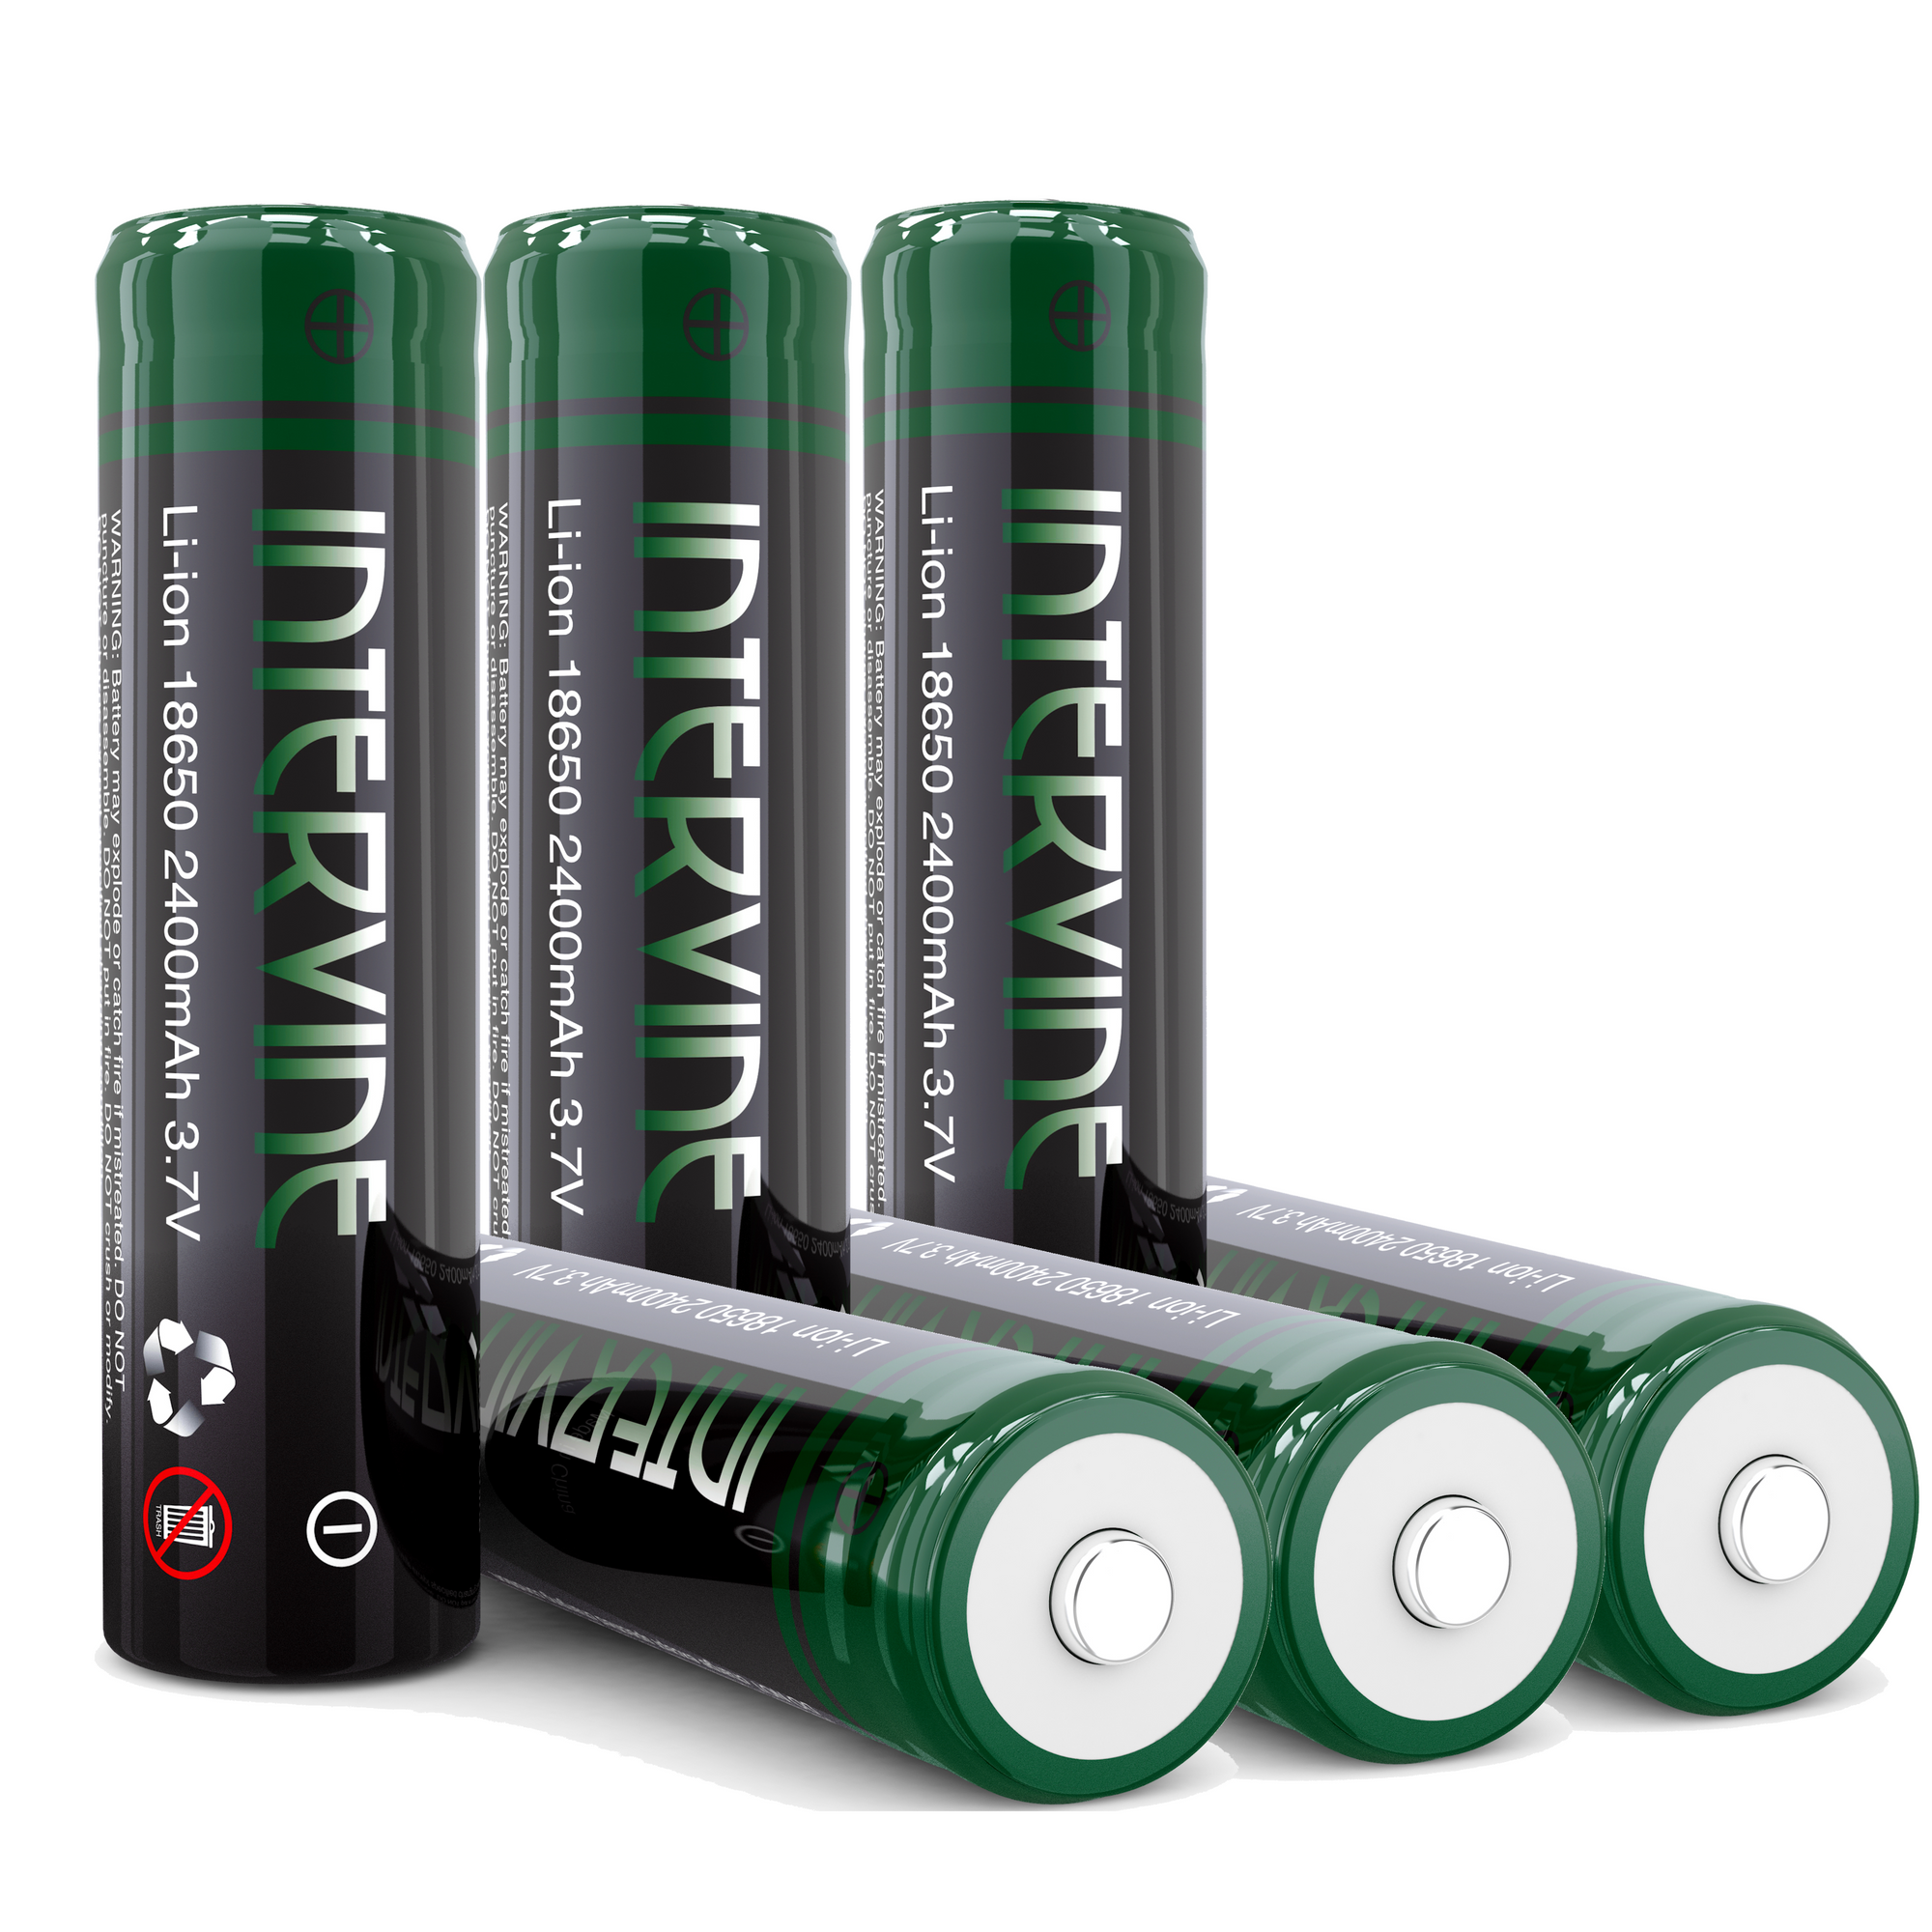 Intervine 2400 Mah Rechargeable 18650 Lithium Ion Batteries - 2 Pack